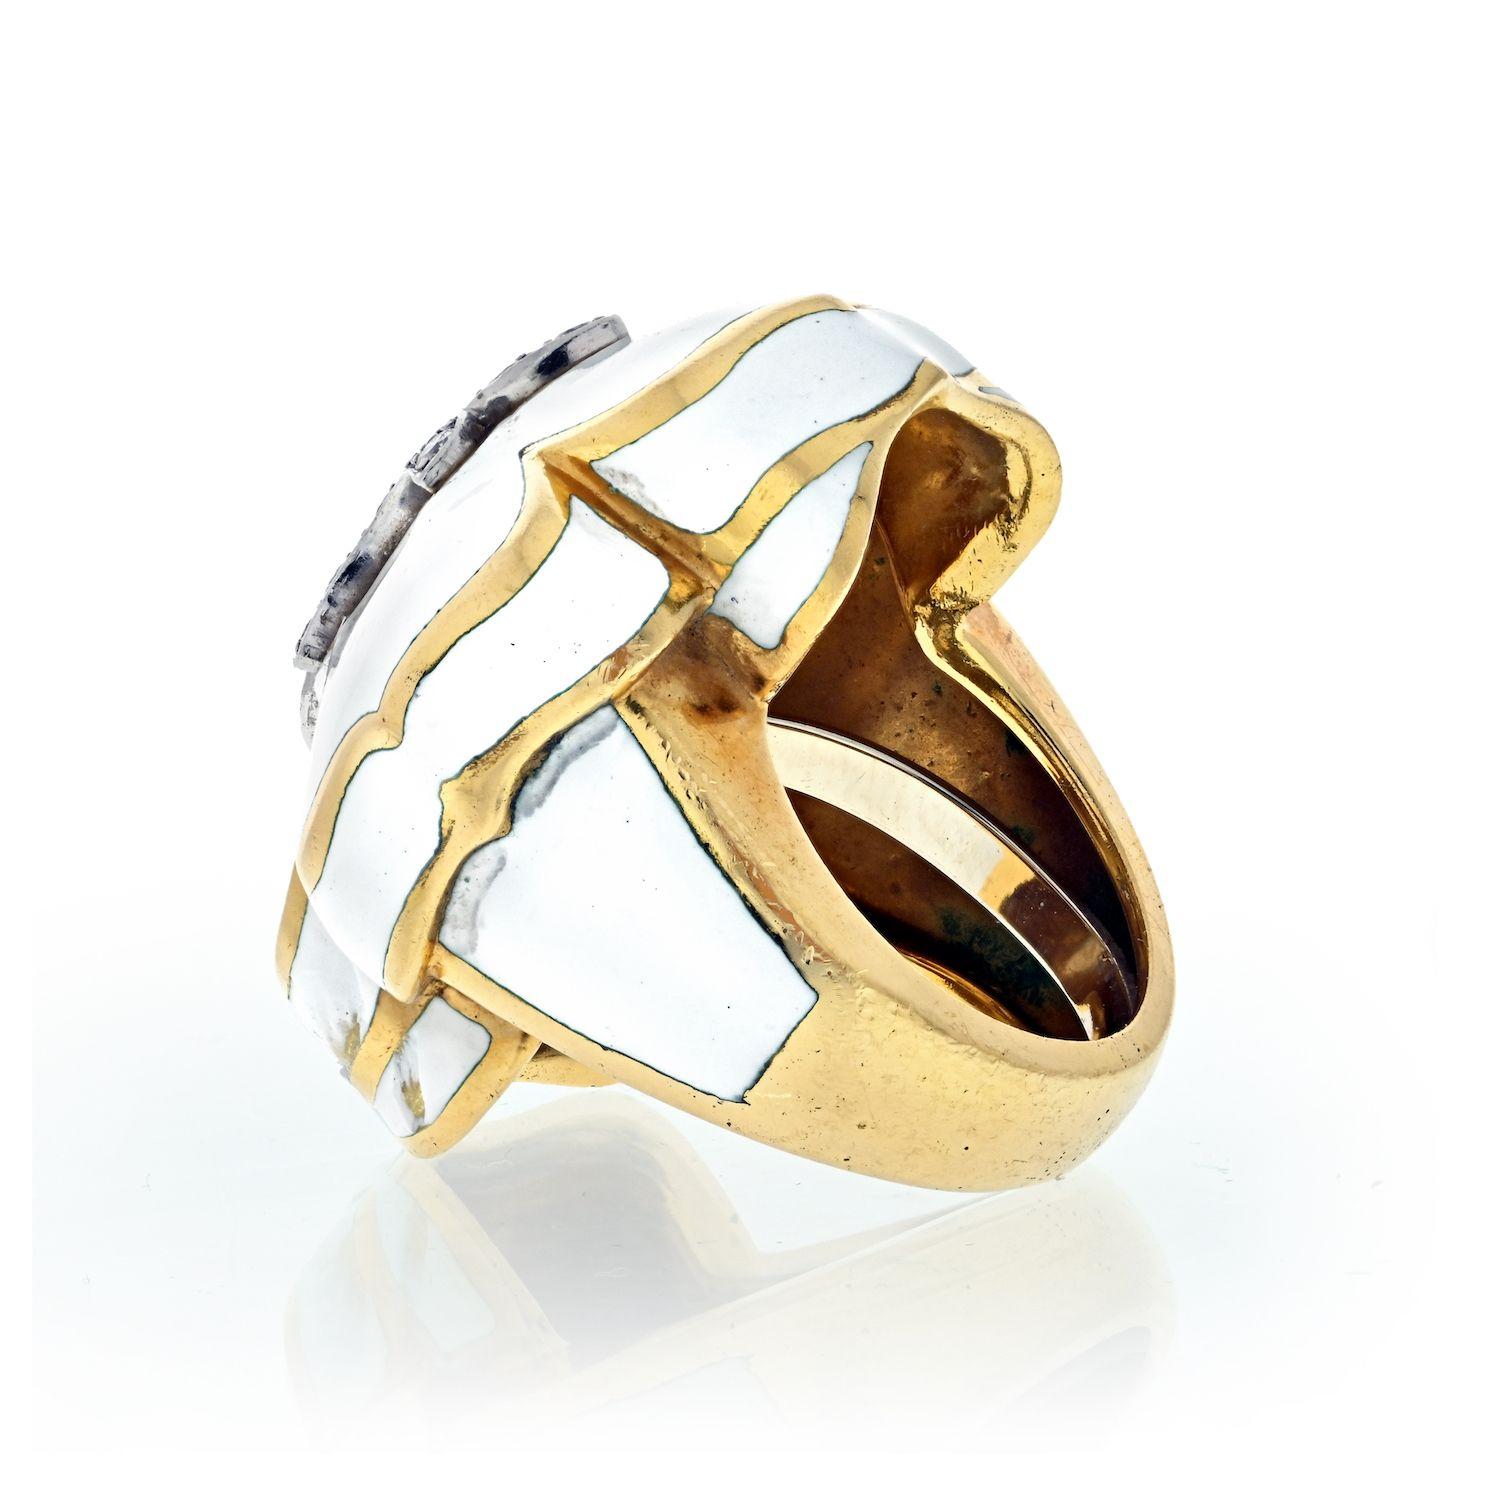 A statement cocktail ring made in 18K Yellow Gold with Fleur de Lis Motif ring by David Webb.
Featuring 0.75 Carats of Round Brilliant Diamonds.
White Enamel.
Measurements: Band Width 12.7mm, Ornament Width 26.1mm, Ornament Length 32.7mm. Ring size